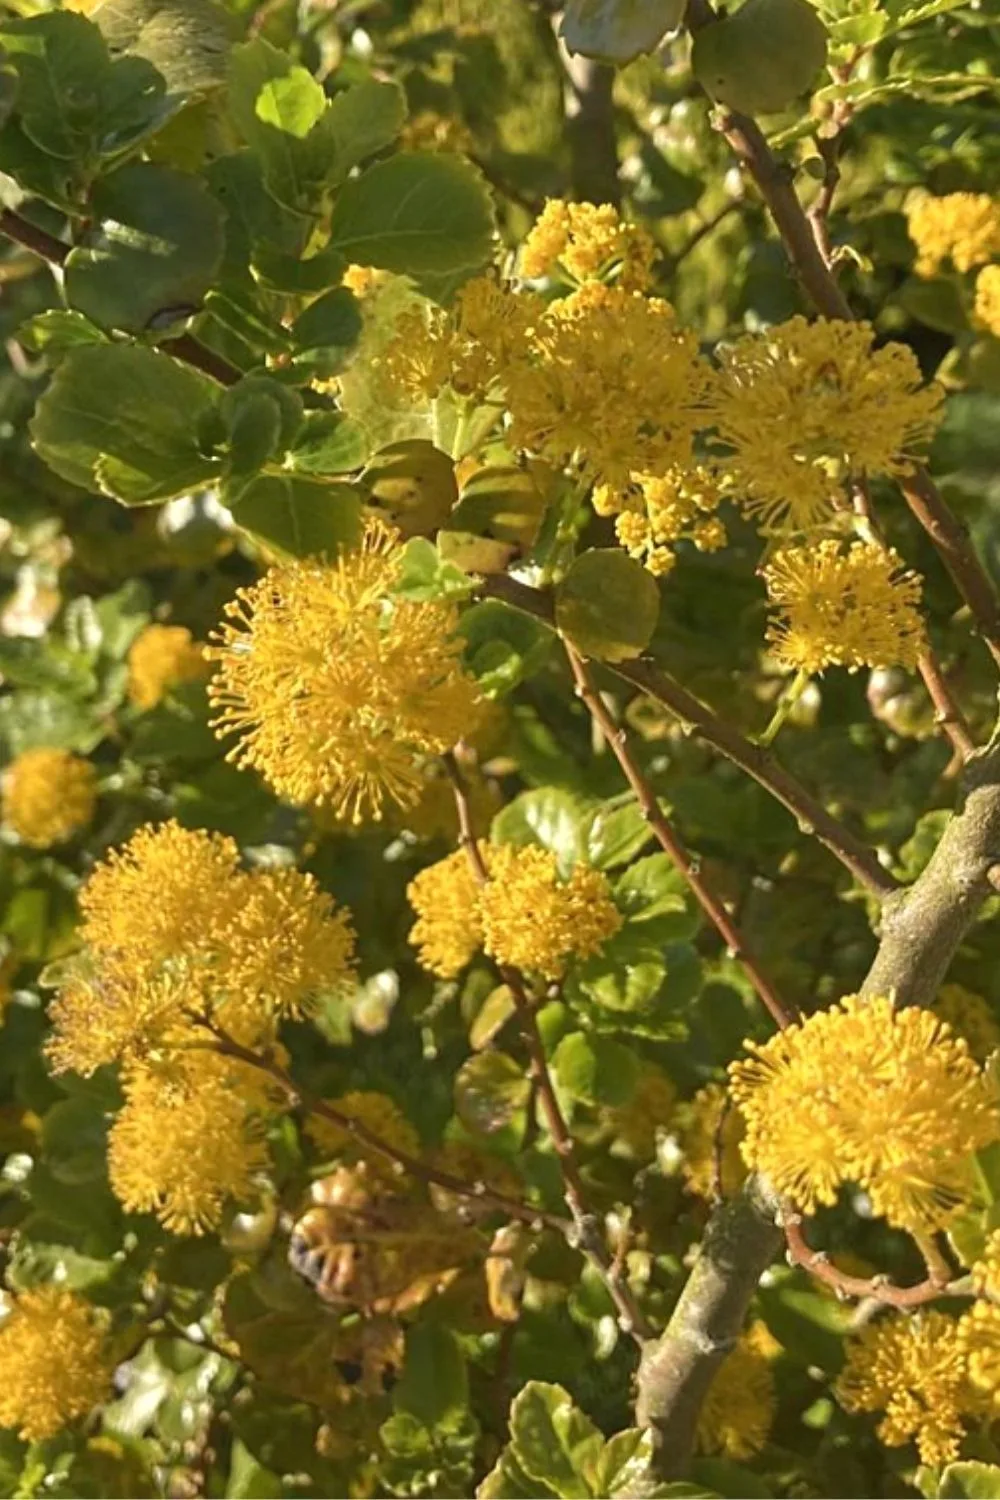 Azara Serrata (Saw-toothed Azara) is a great plant to grow in a northwest facing garden as it does well in the shade